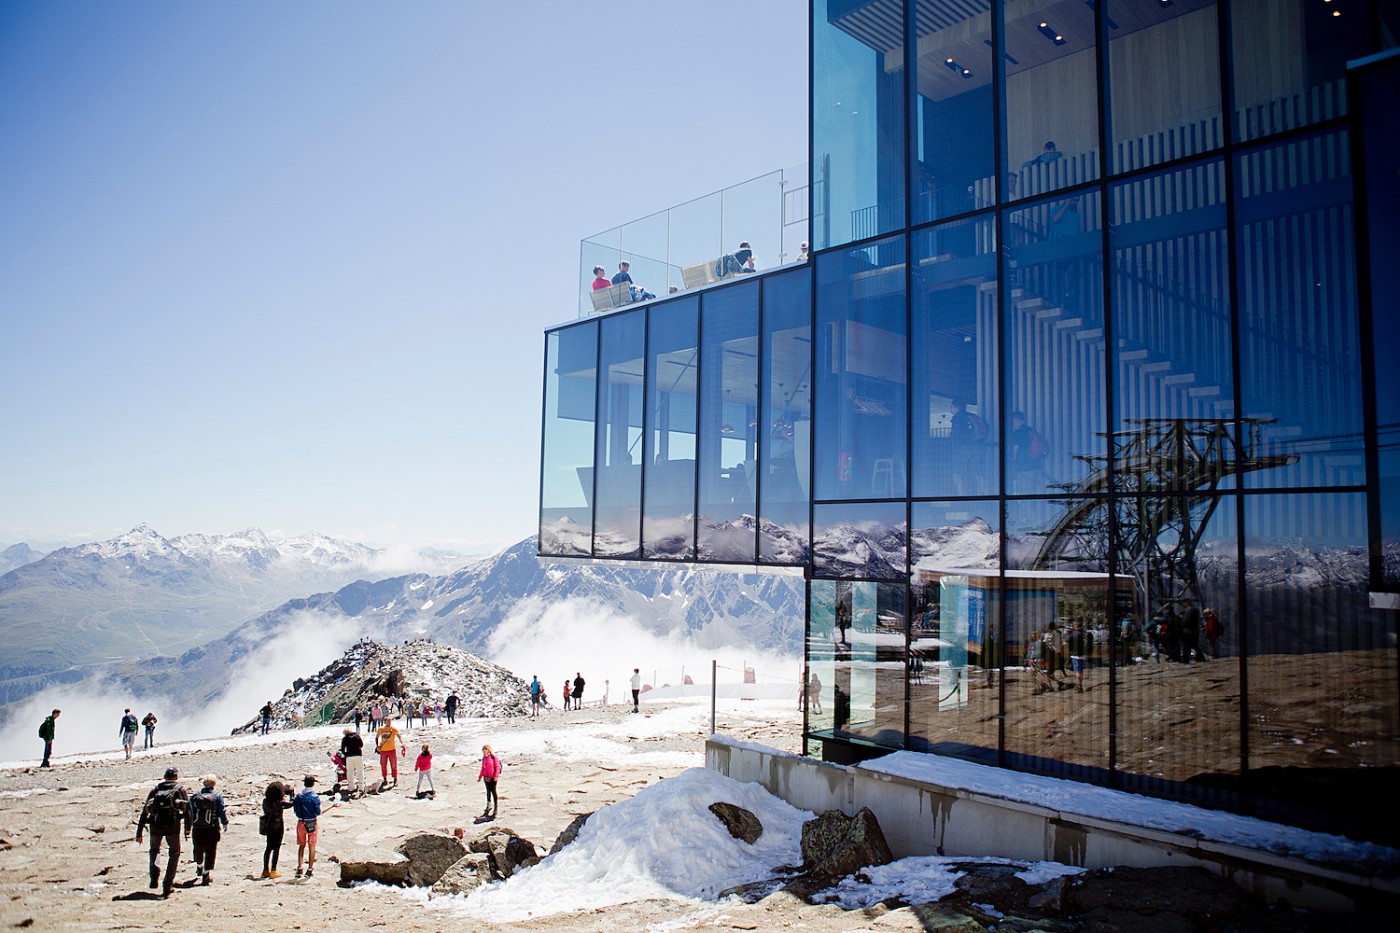 On James Bond’s trails and a gourmet lunch at ice Q